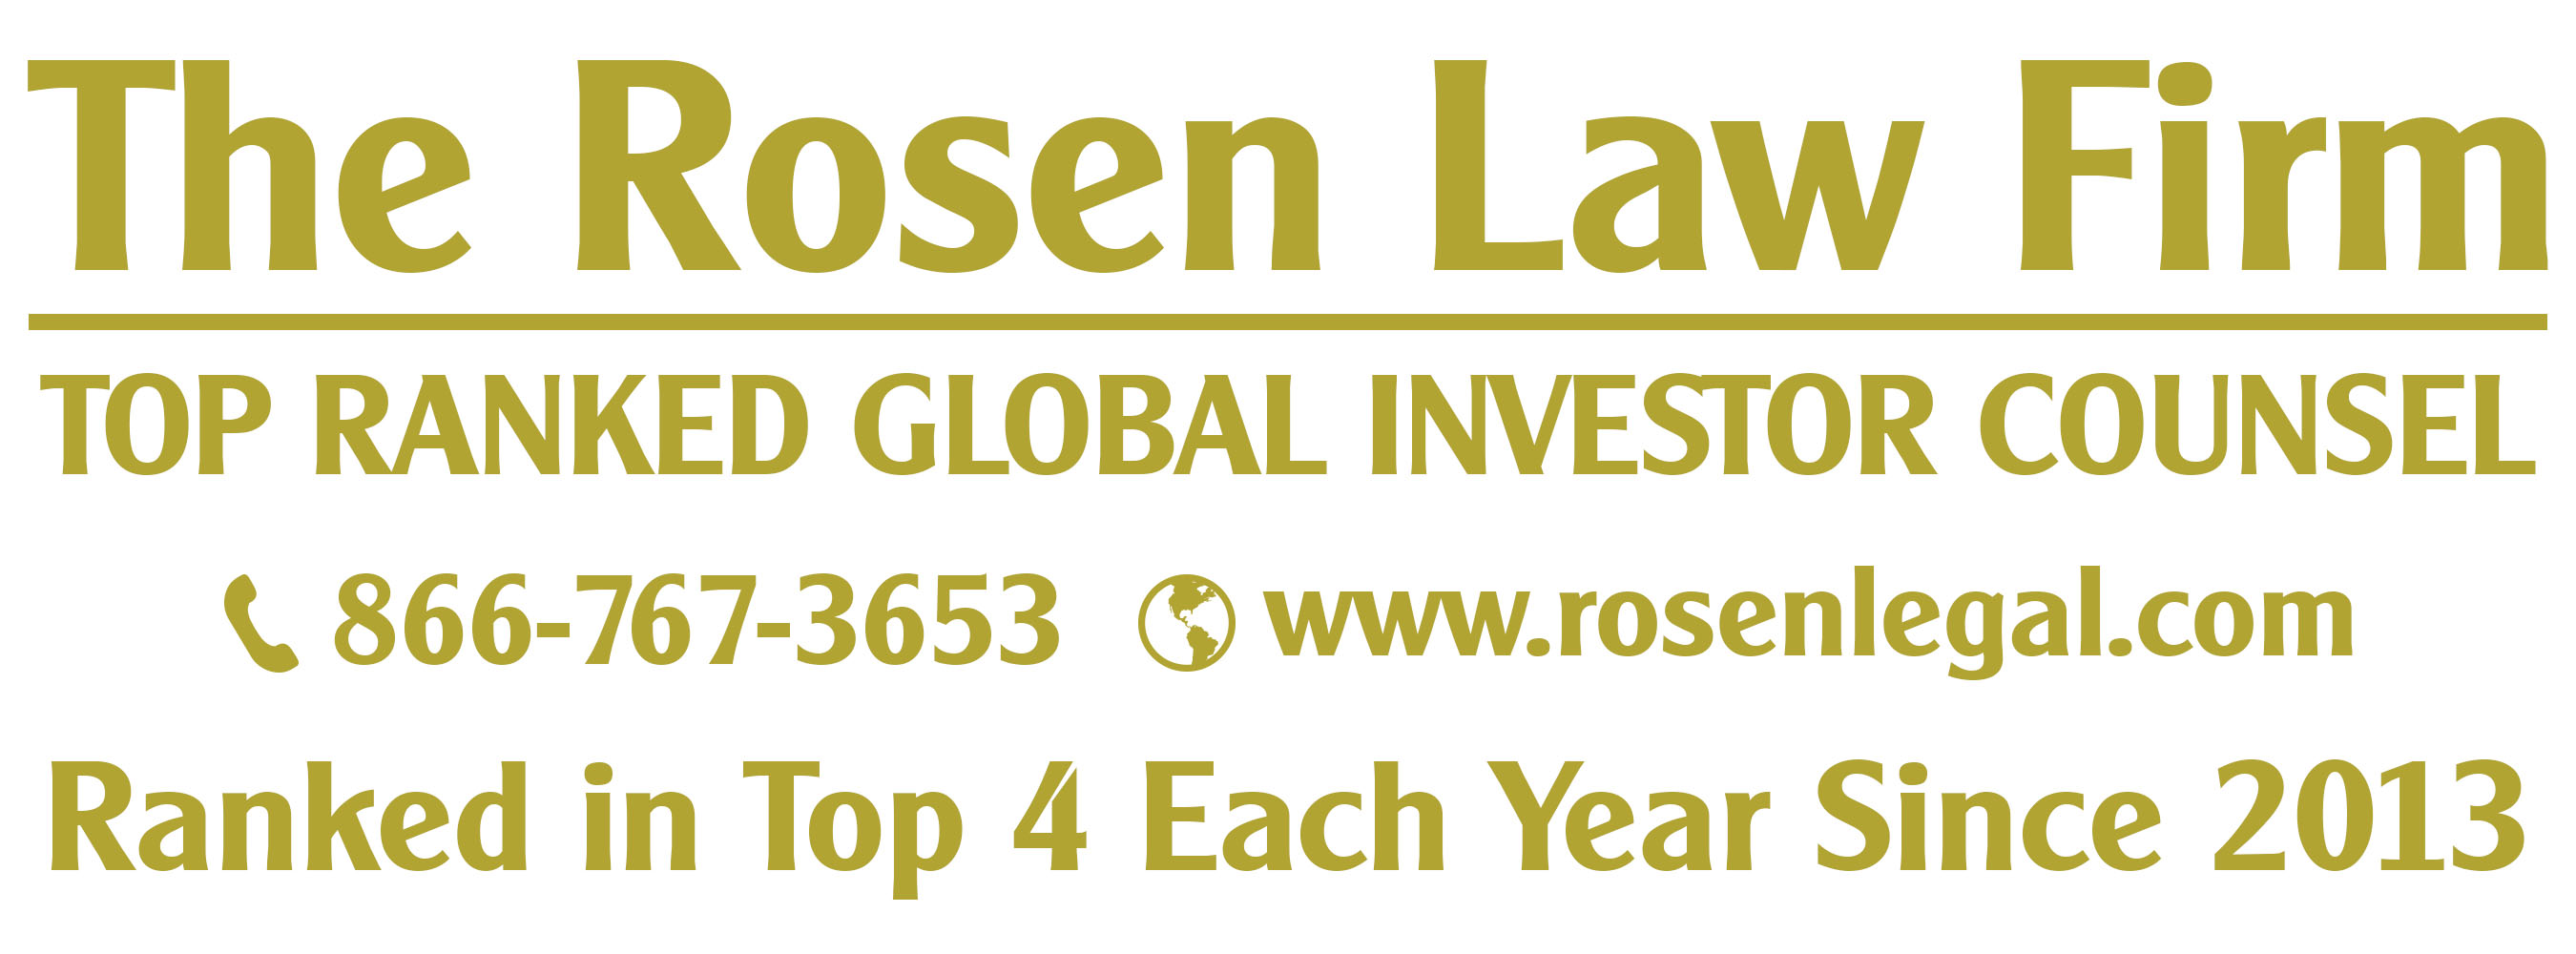 Rosen Law Firm PA, Monday, September 19, 2022, Press release picture